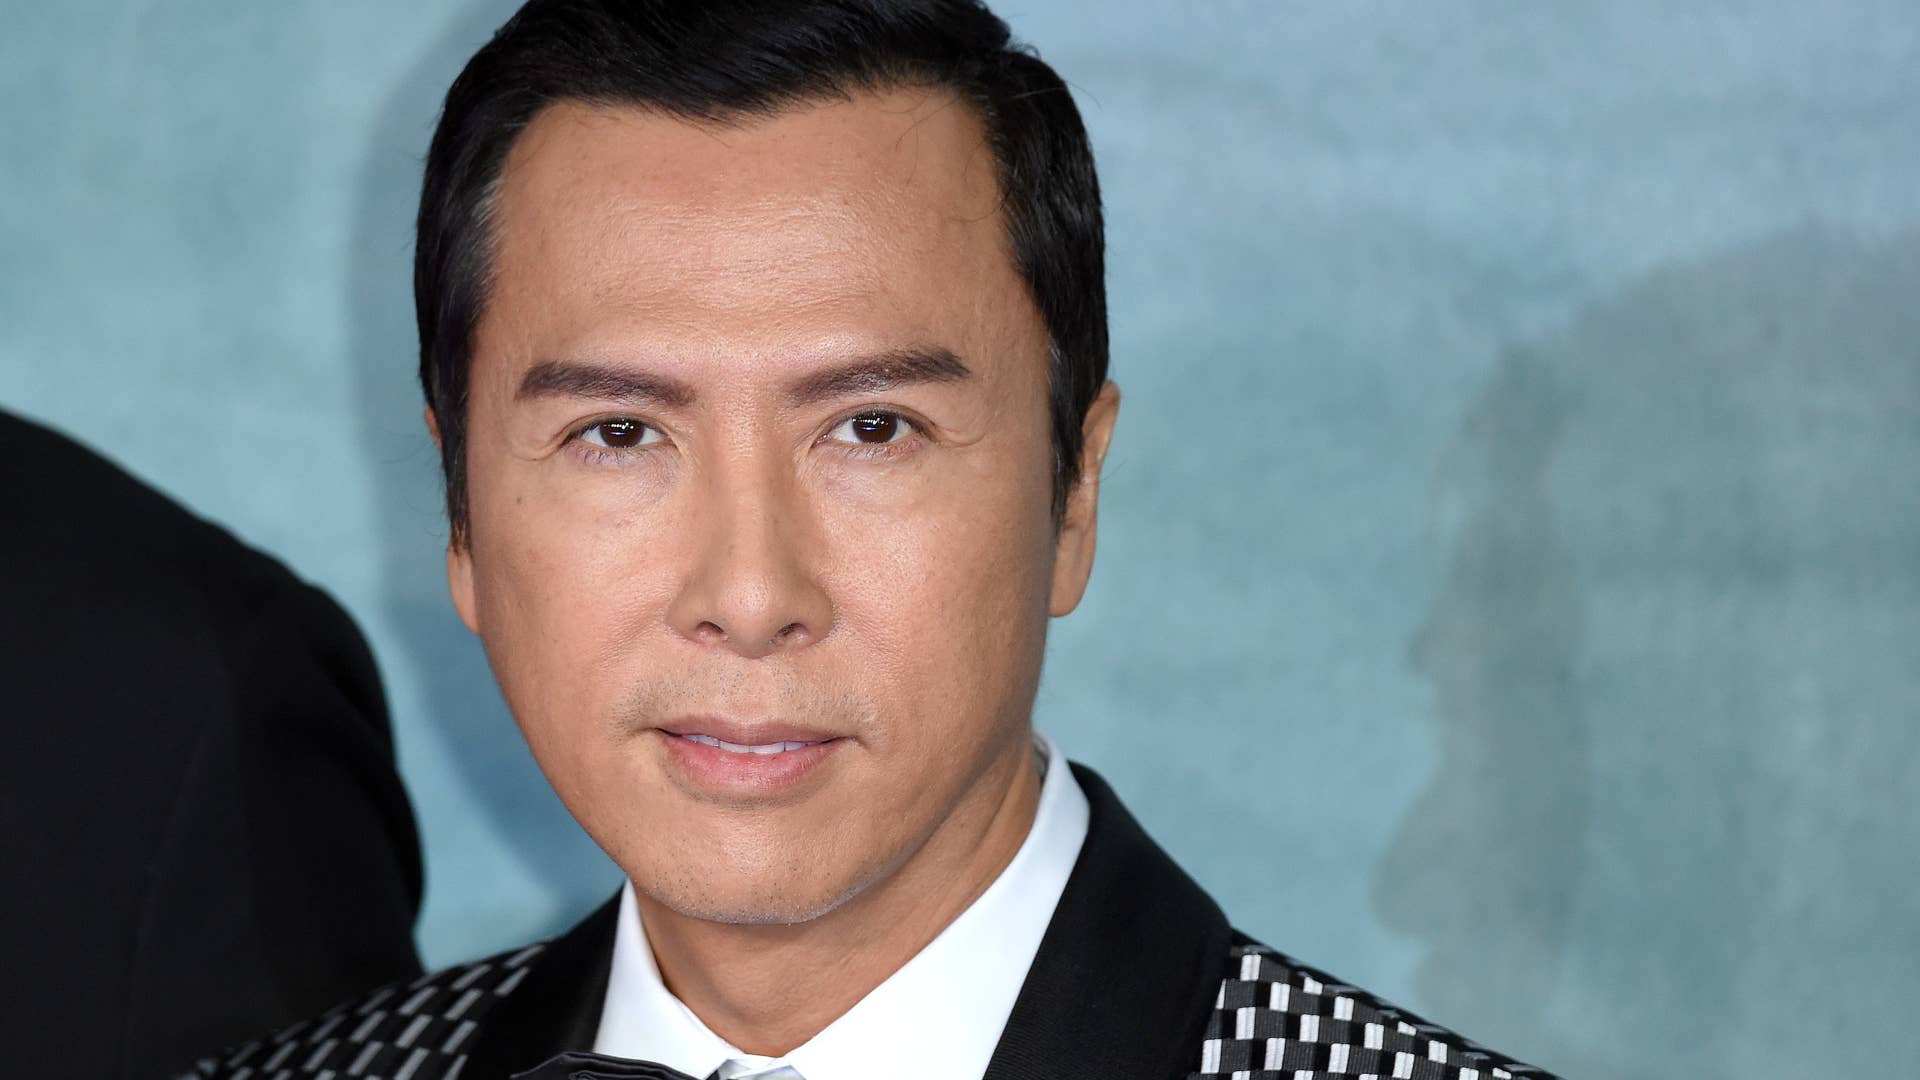 Donnie Yen attends the launch event for "Rogue One: A Star Wars Story."